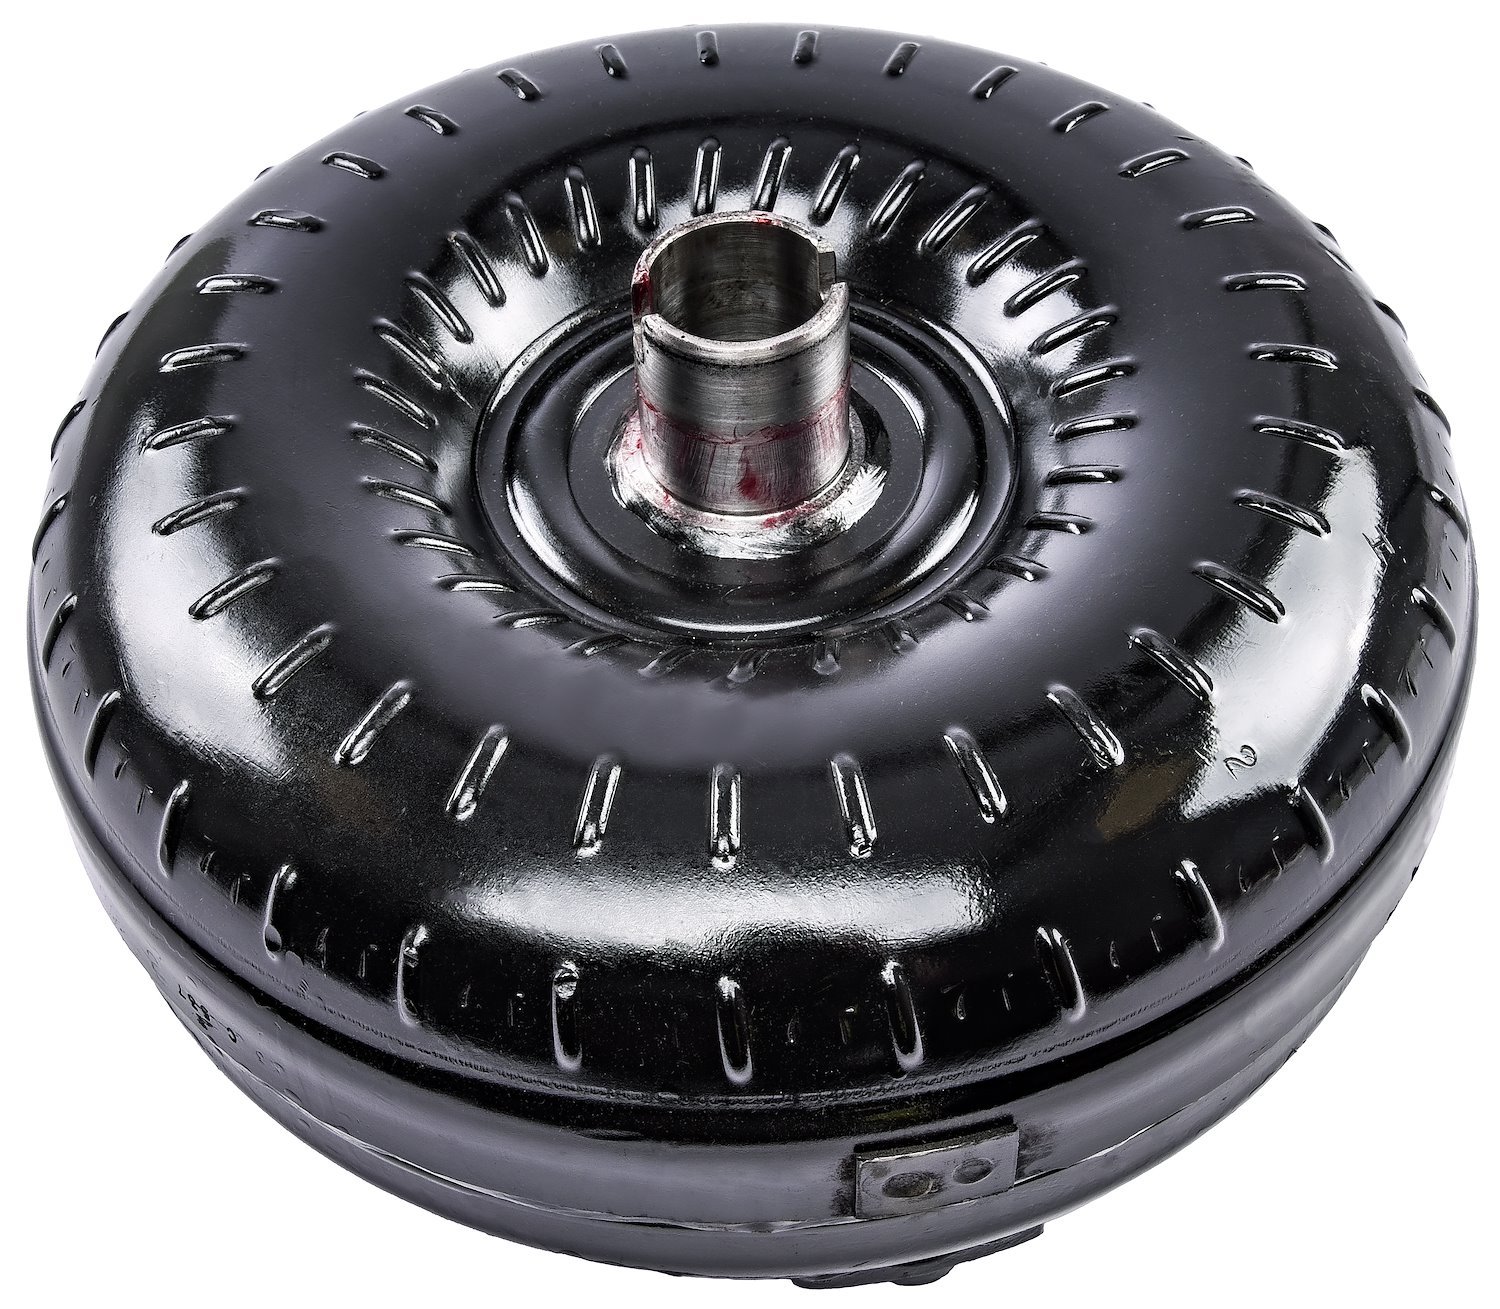 Torque Converter for GM 700R4 [2200-2800 RPM Stall Speed]